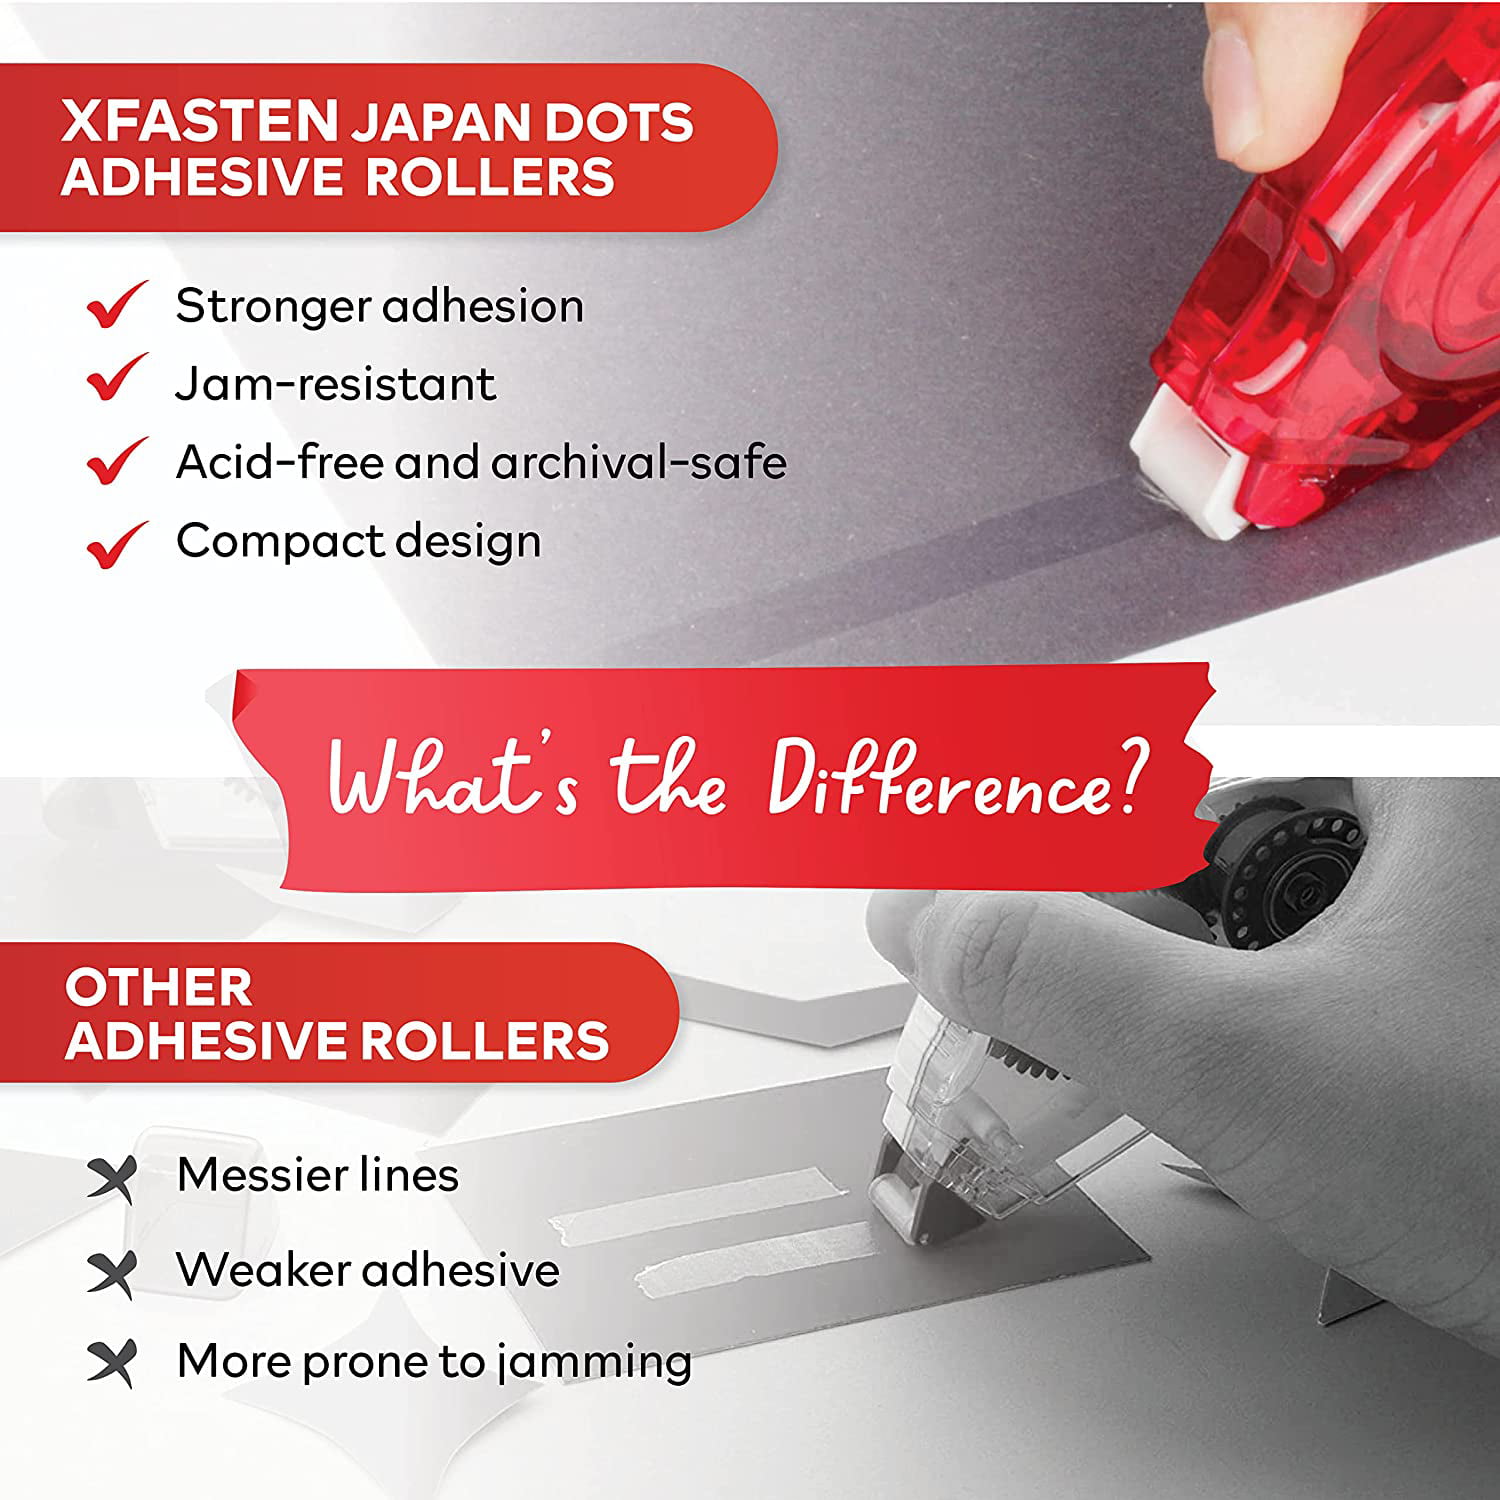 XFasten Japan Dots Double Sided Adhesive Roller, 8mm x 26 Feet